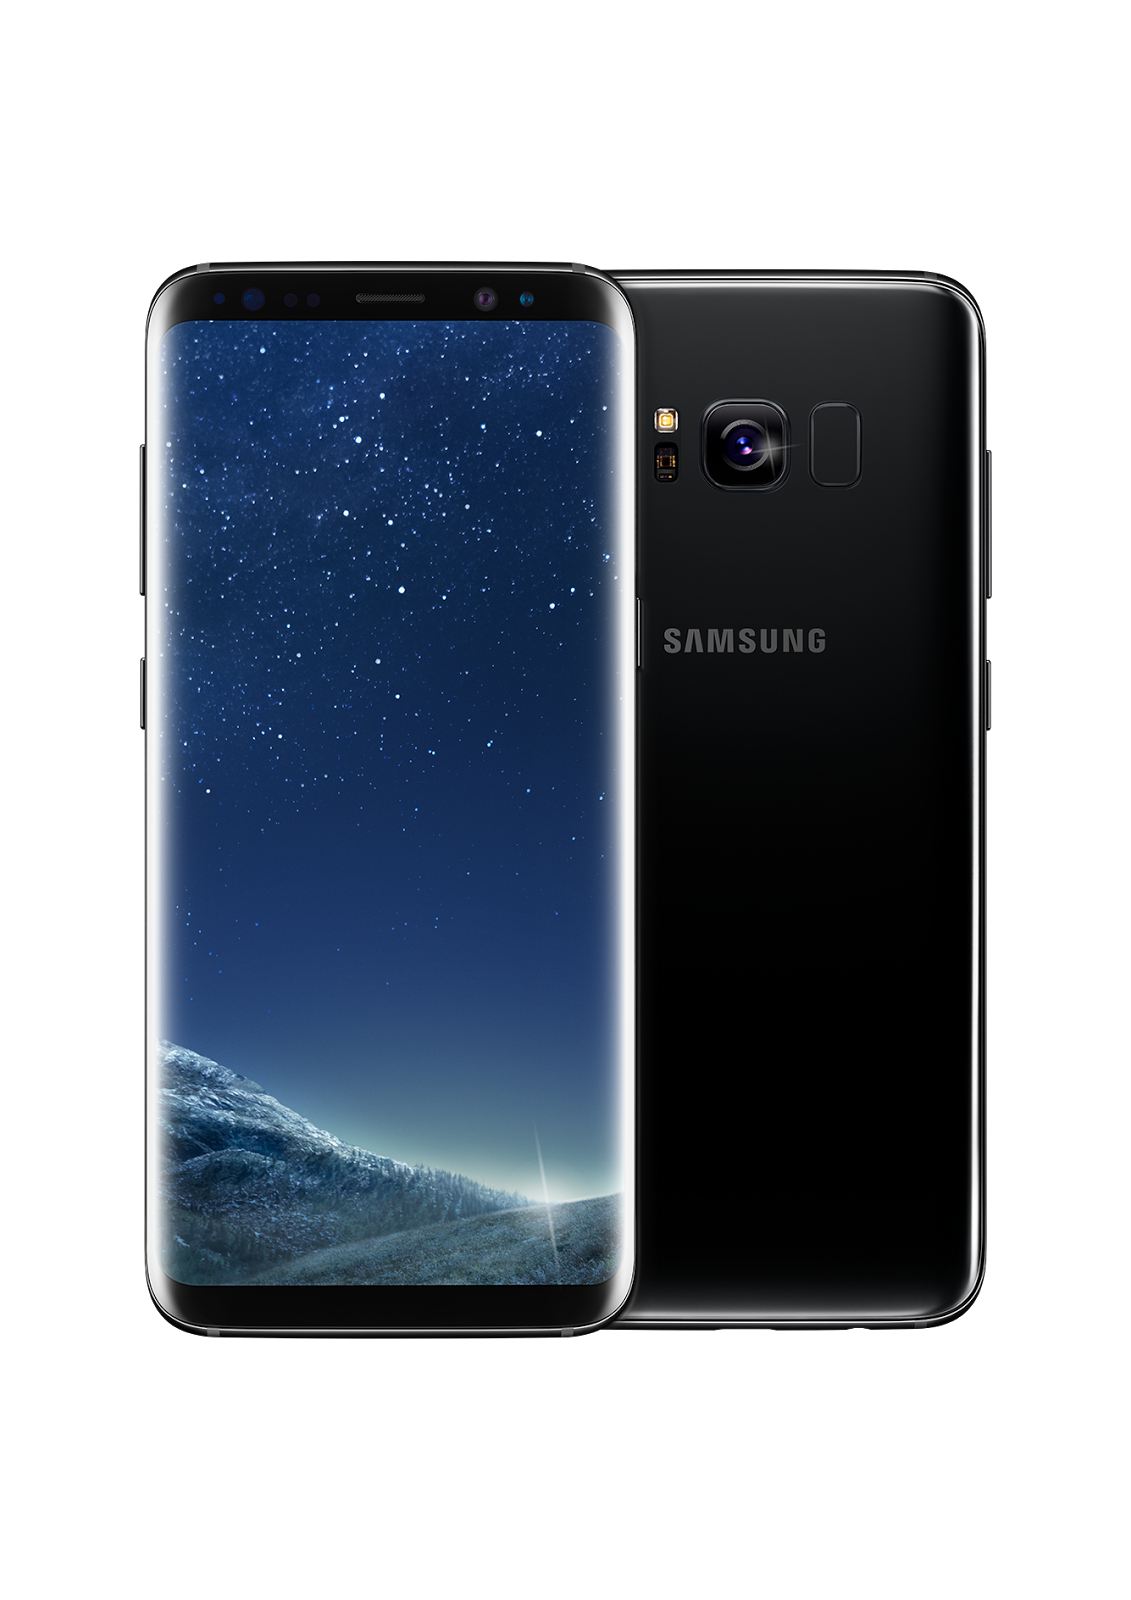 Pre-order Samsung Galaxy S8 and S8+ in Malaysia